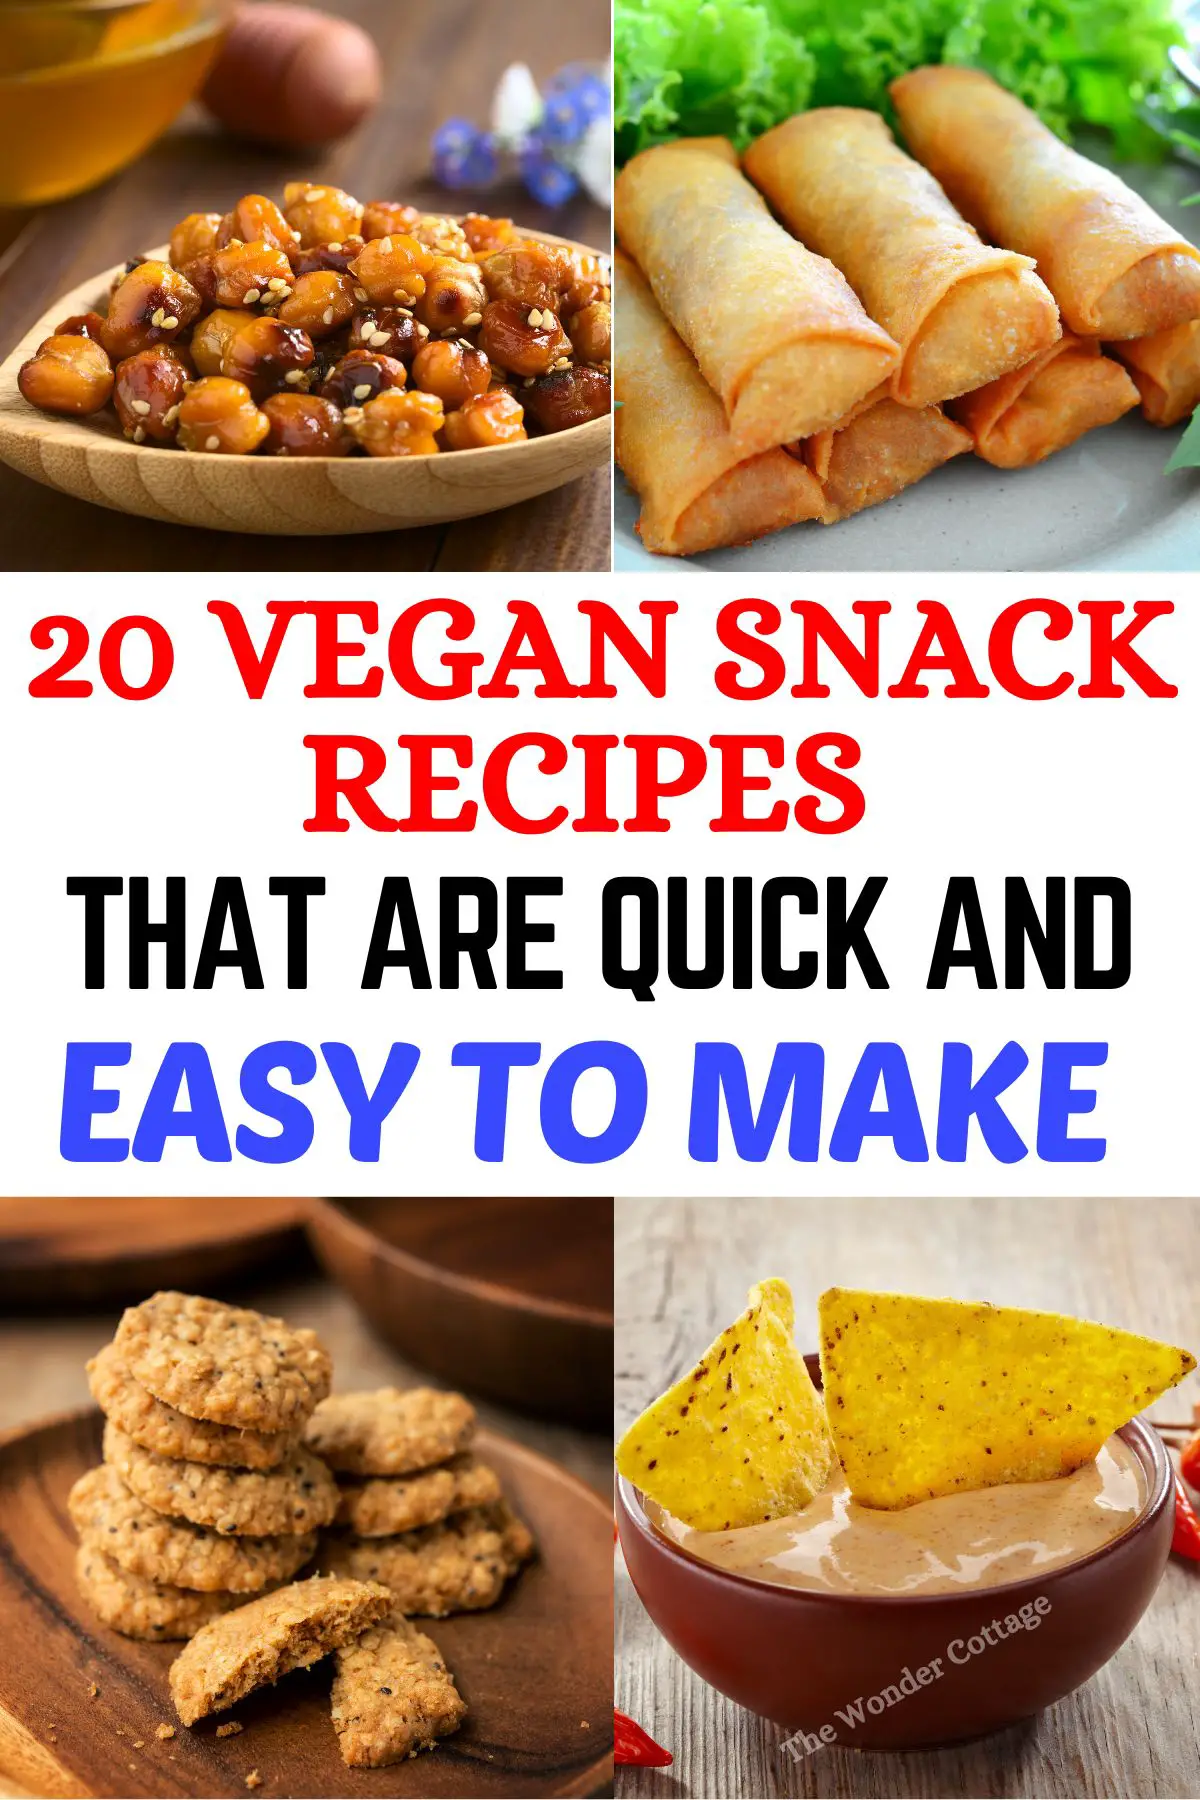 20 Vegan Snack Recipes That Are Quick And Easy To Make